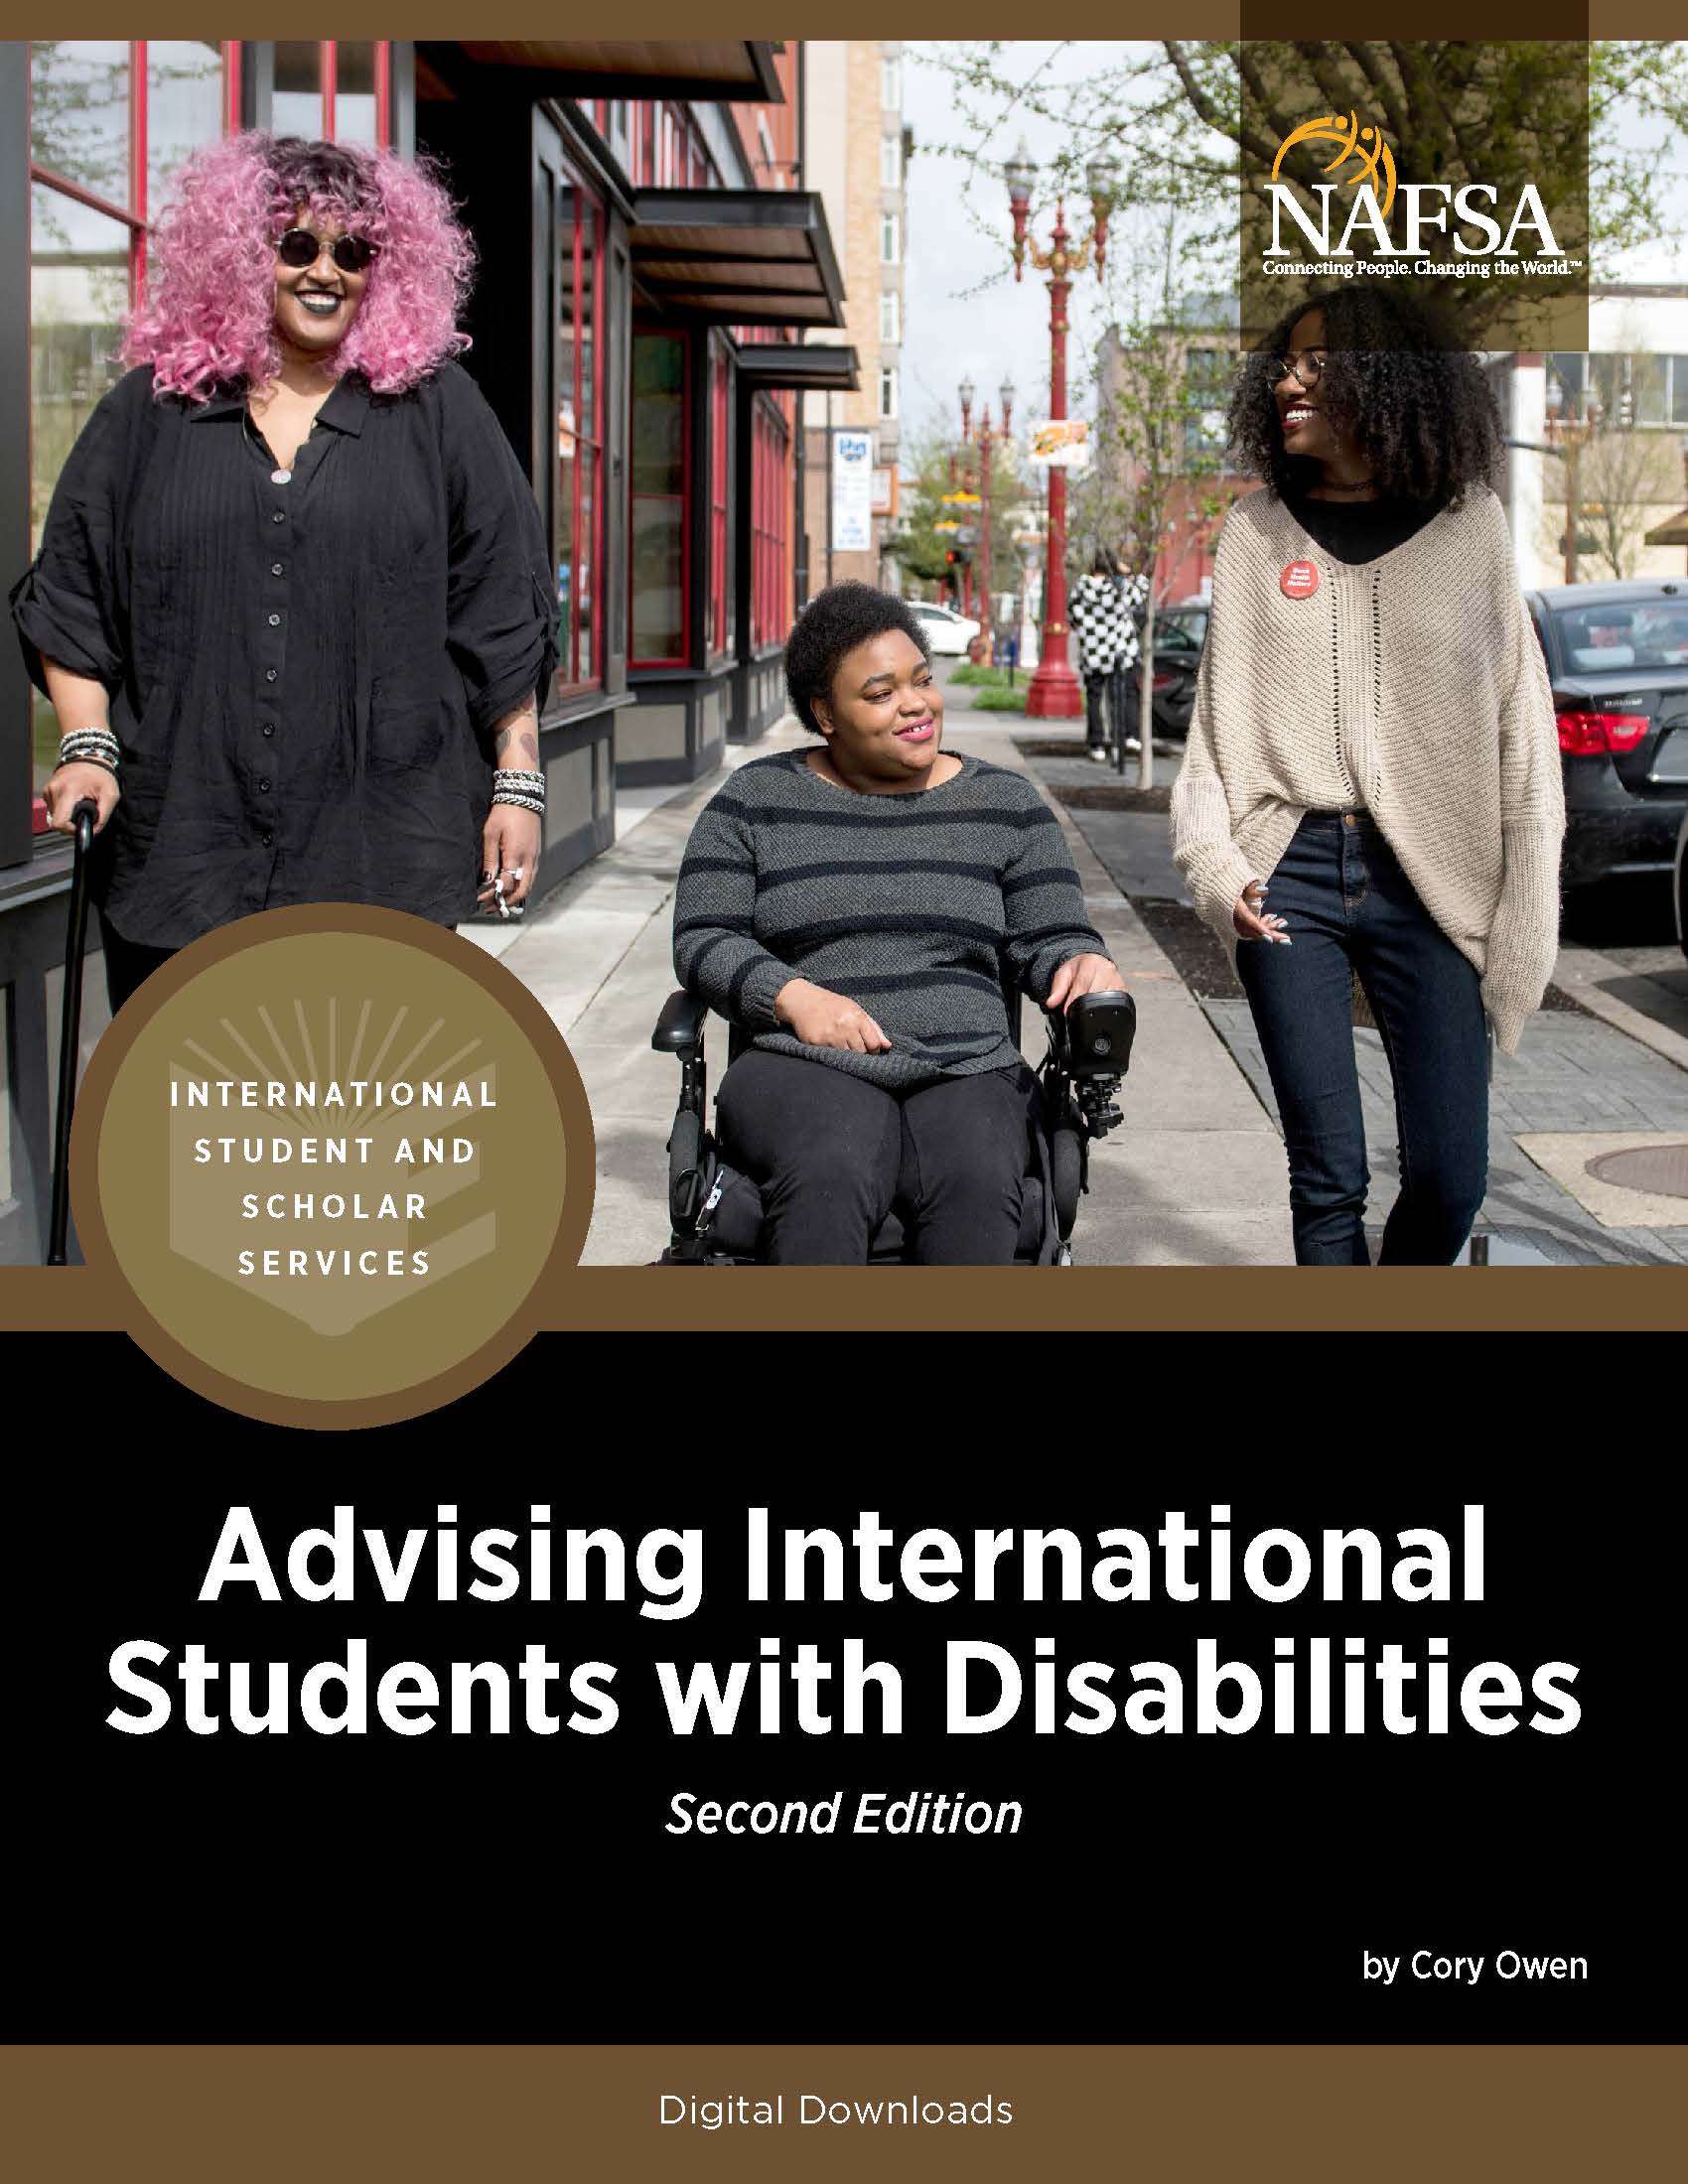 Cover of advising international students with disabilities